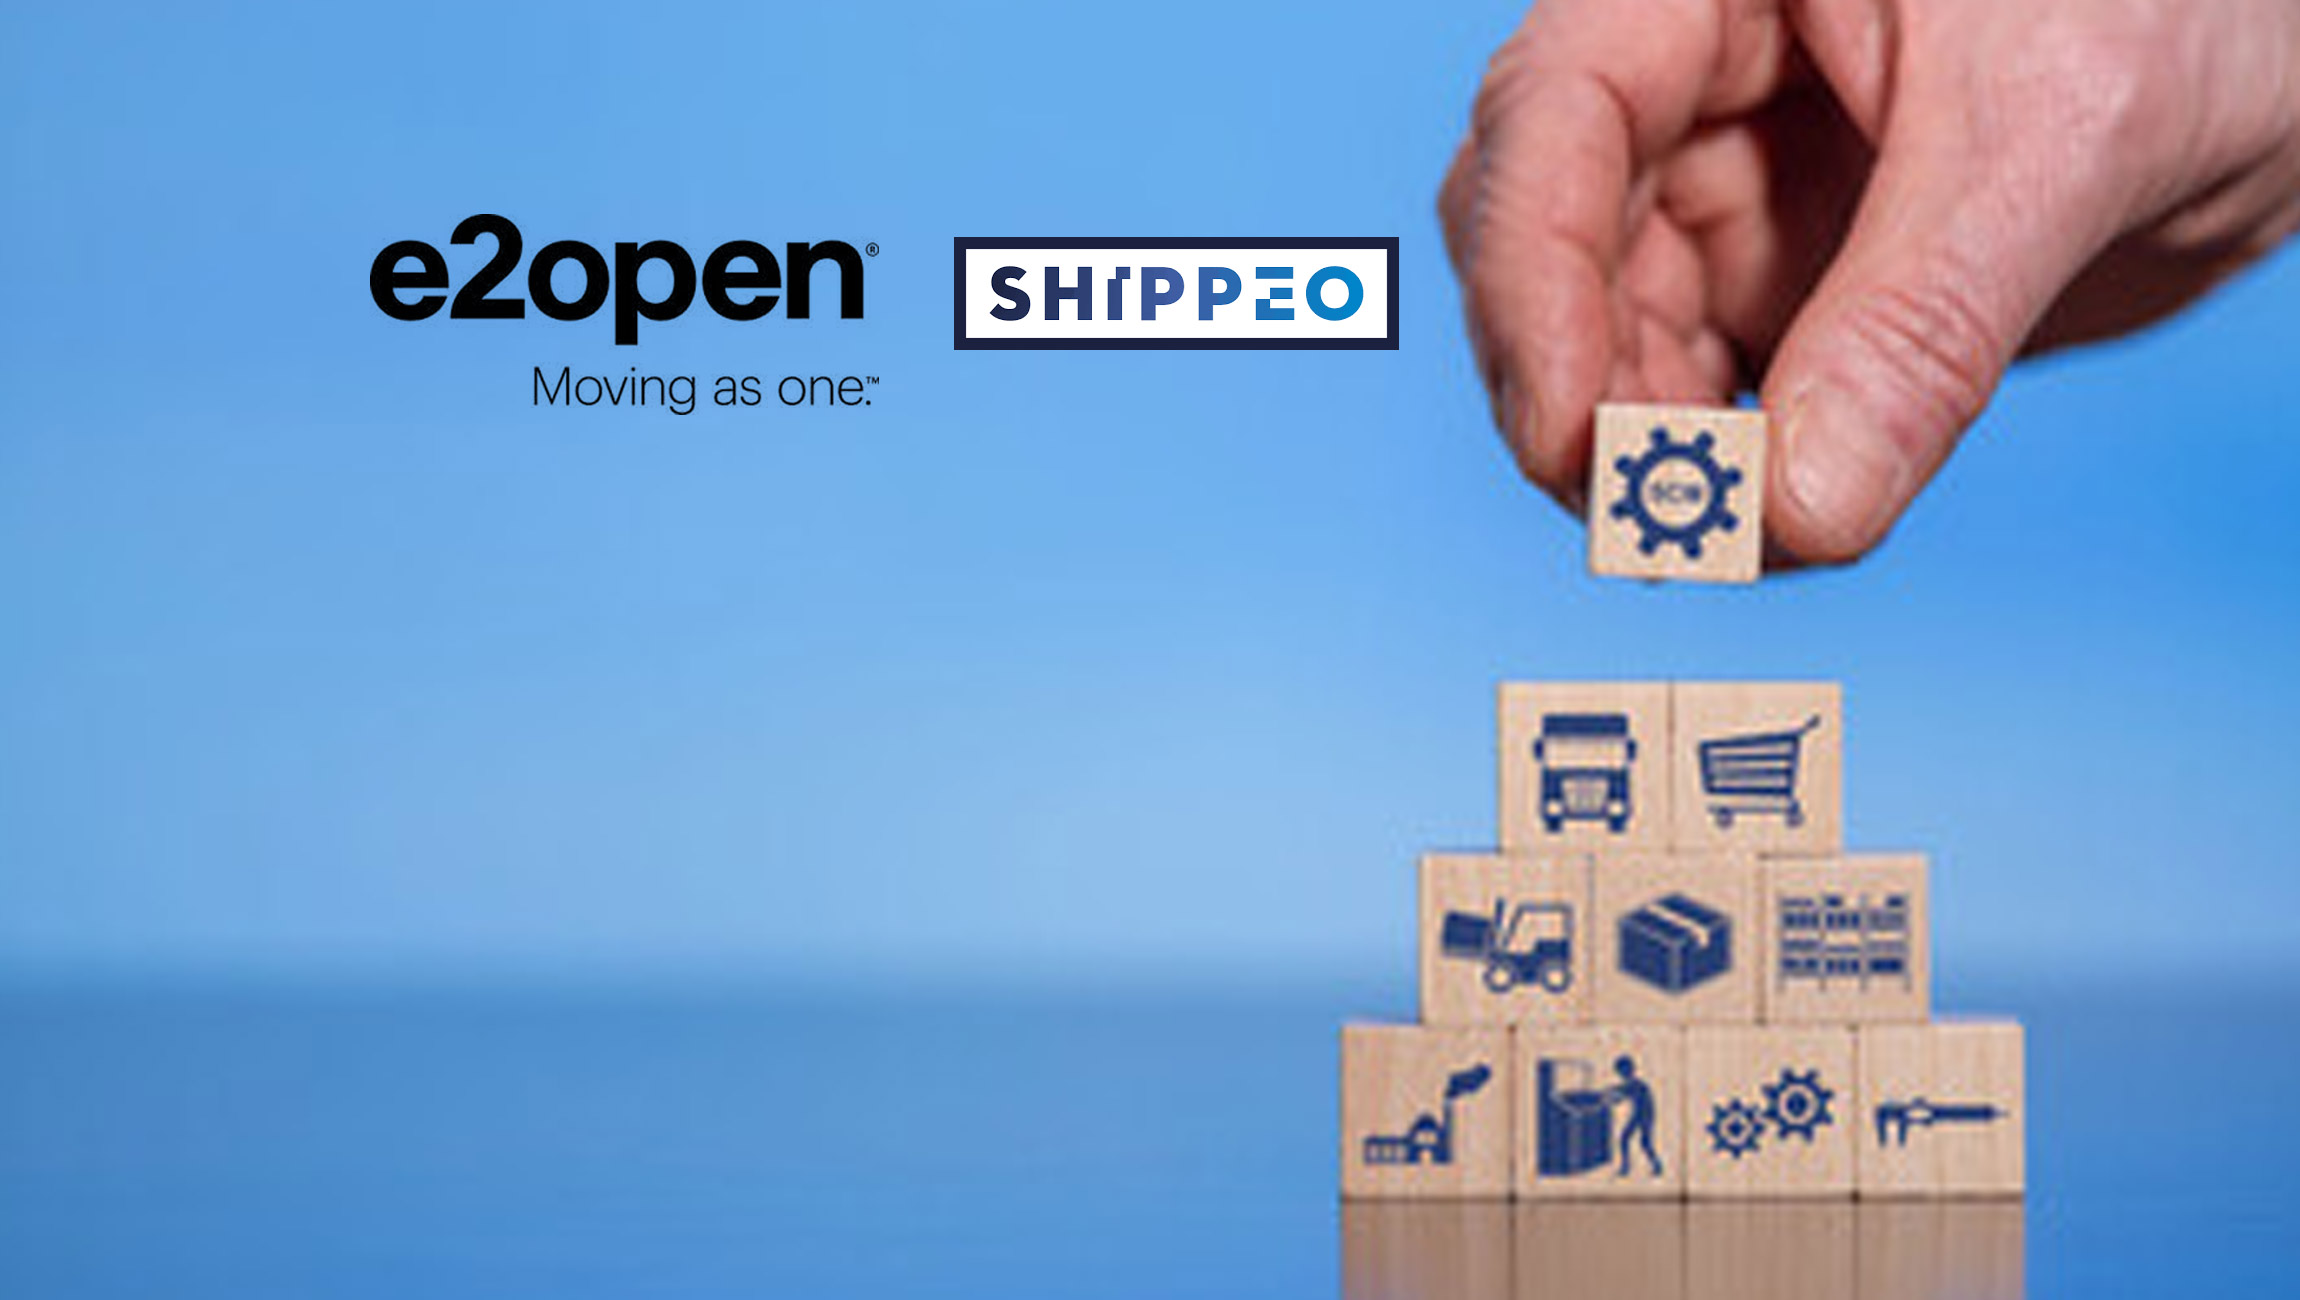 E2open and Shippeo Expand Partnership to Deliver Native Real-Time In-Transit Visibility